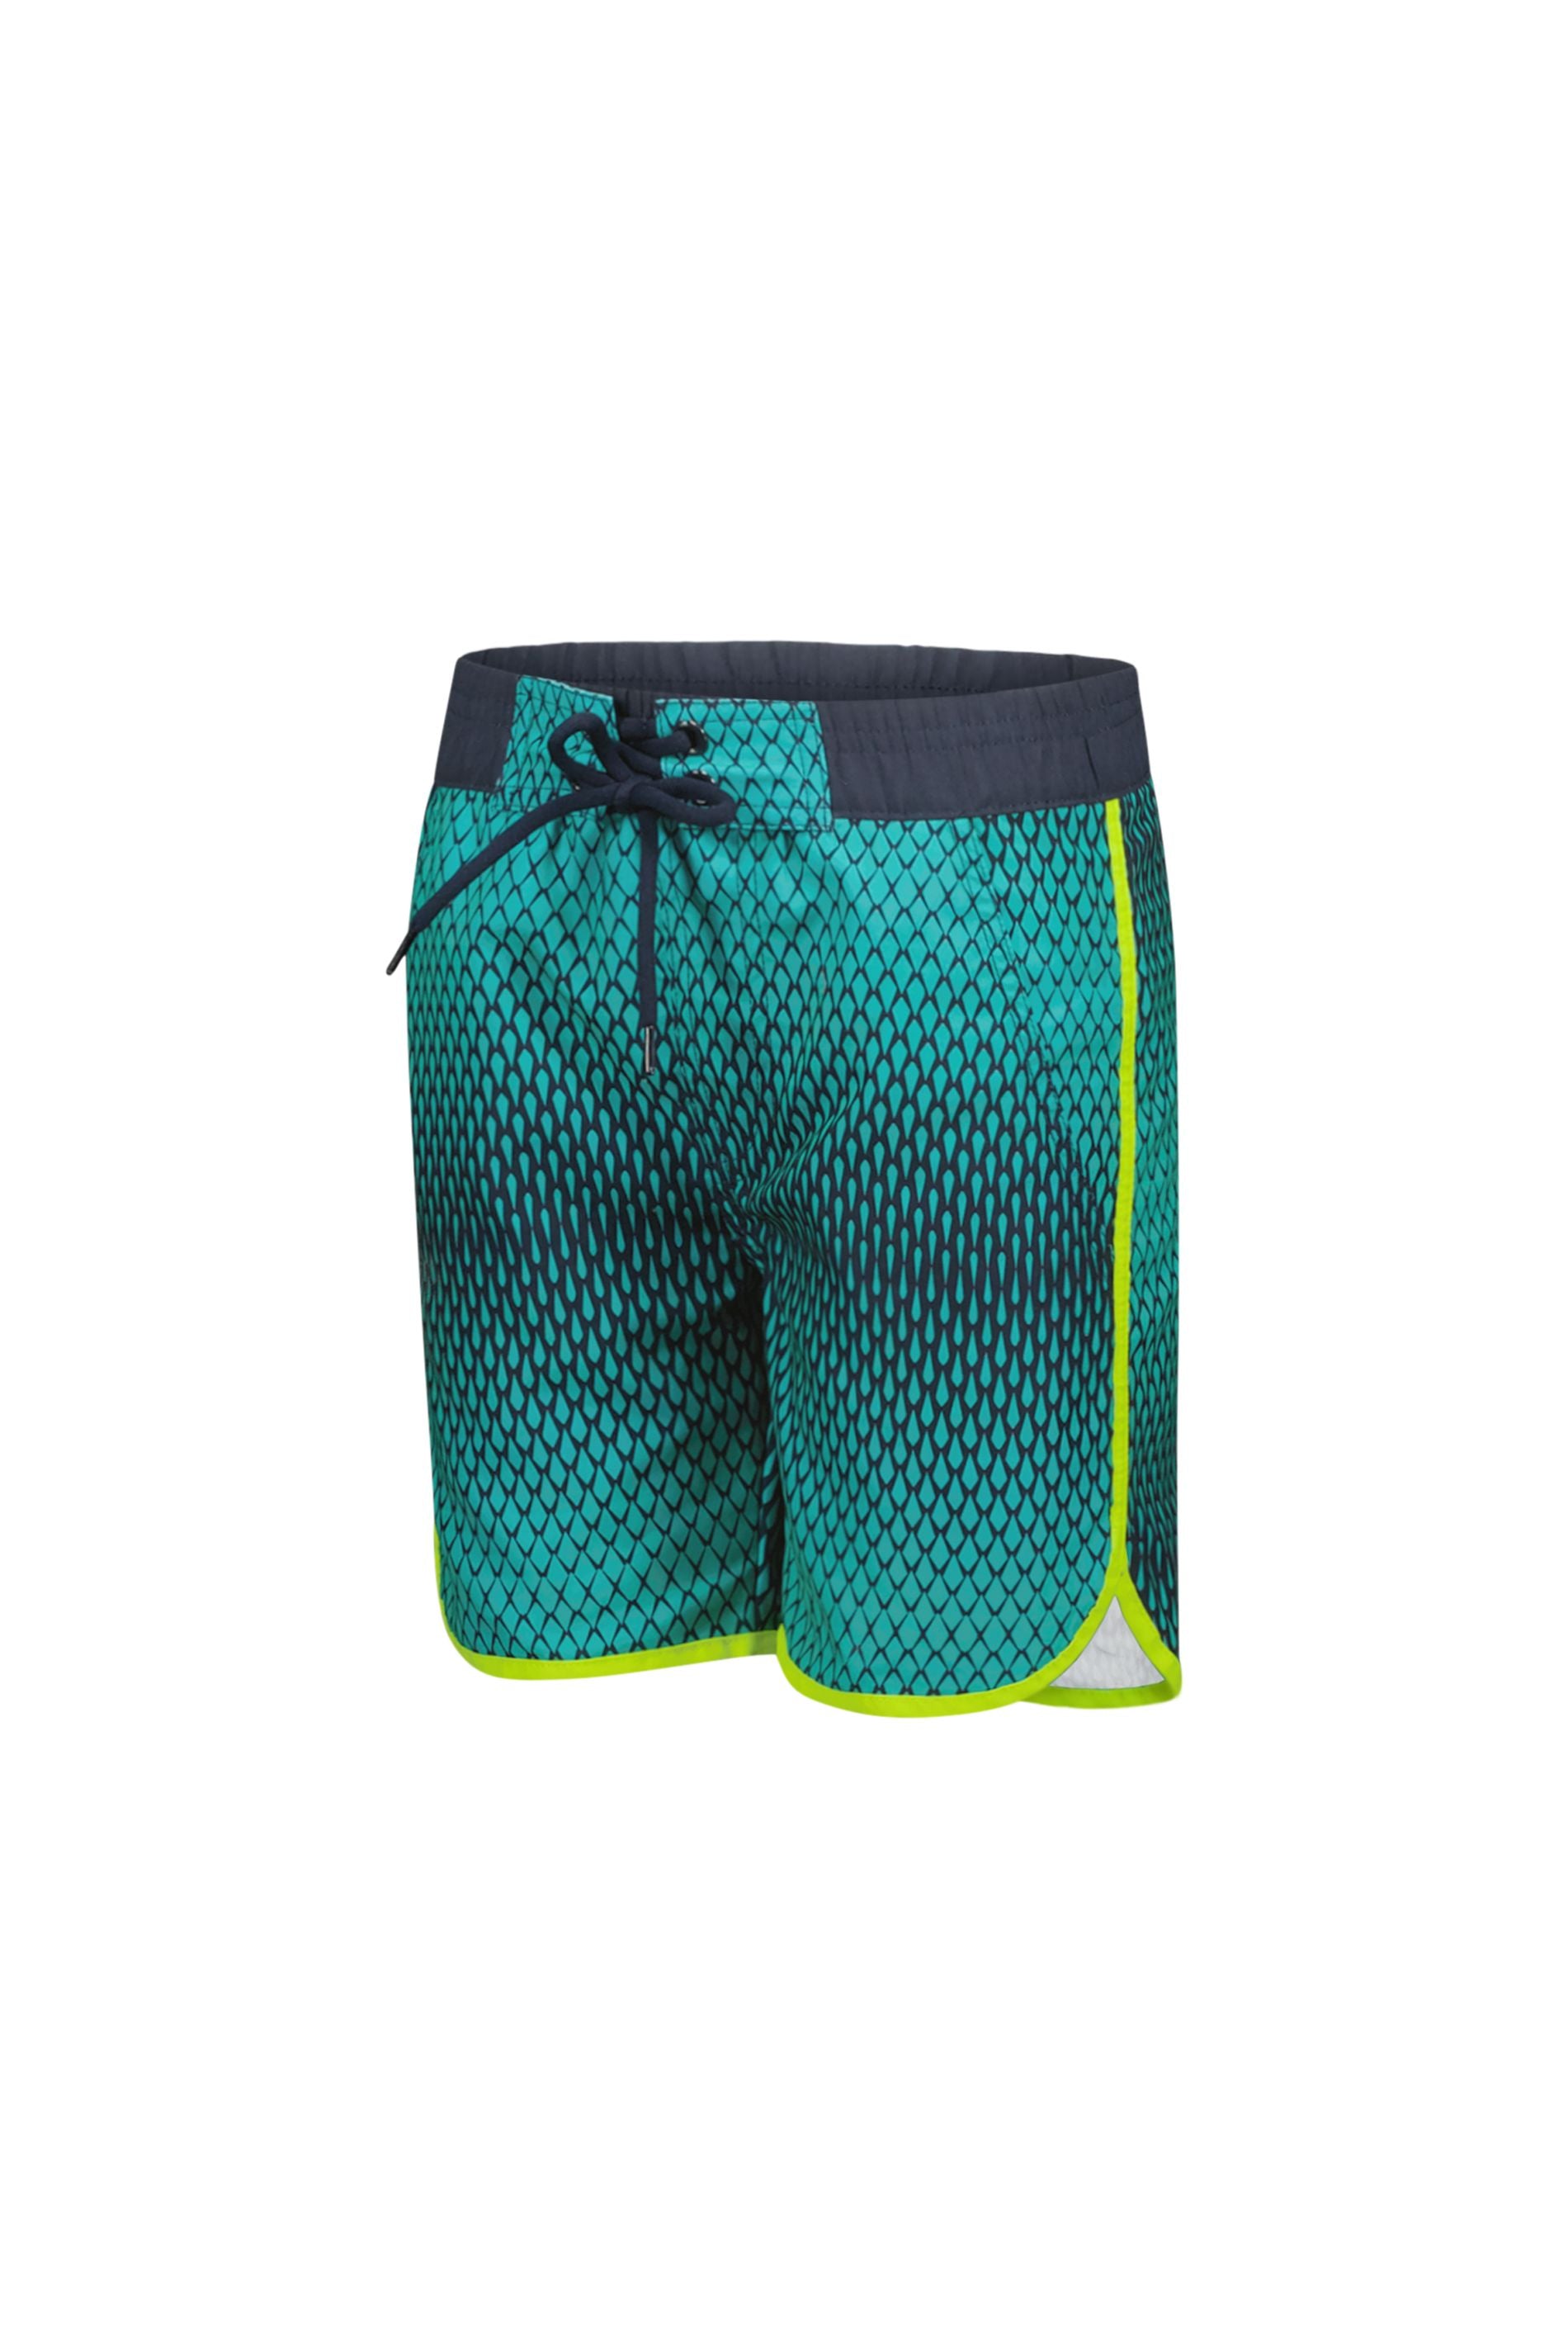 Boys woven swimshort with aop and contrast binding